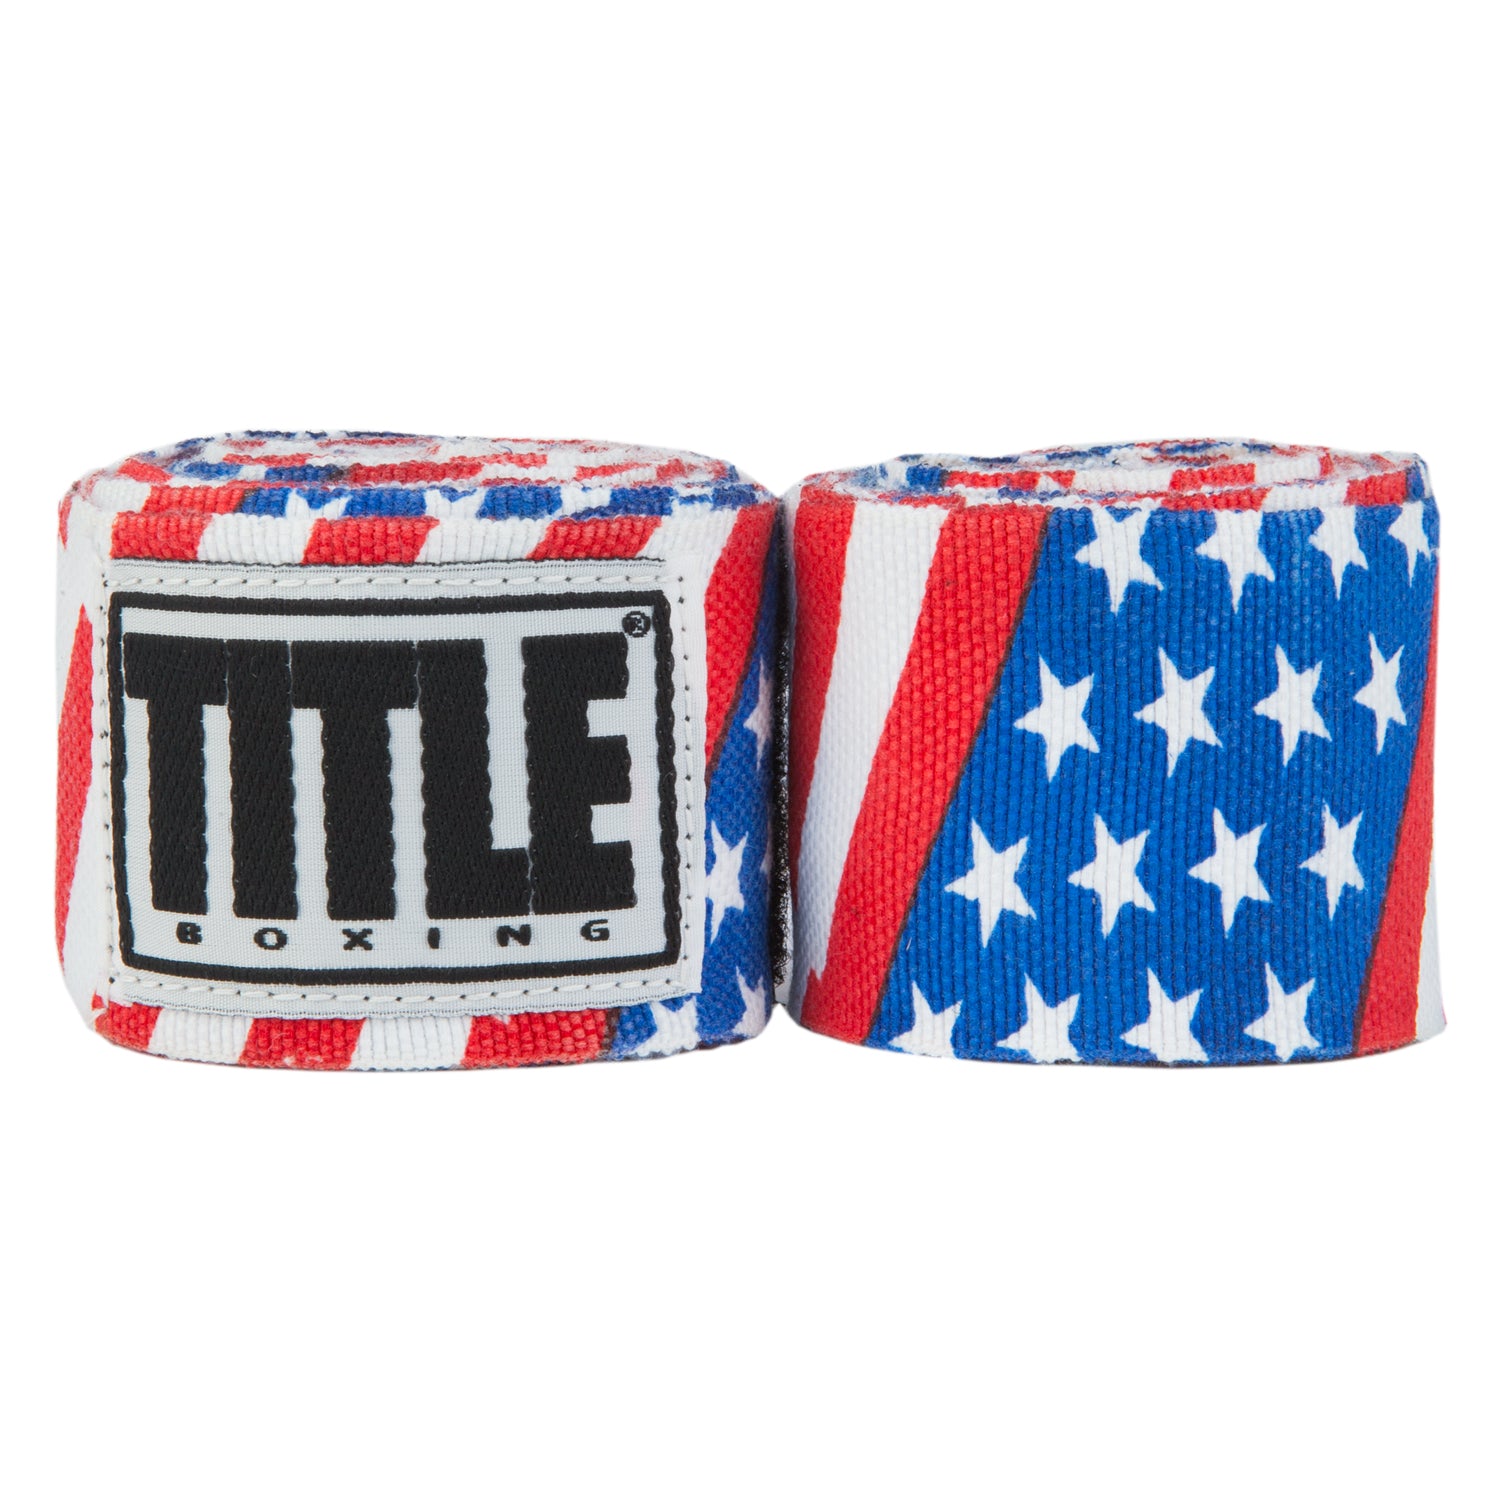 Battle Forged 180 inch Hand Wraps